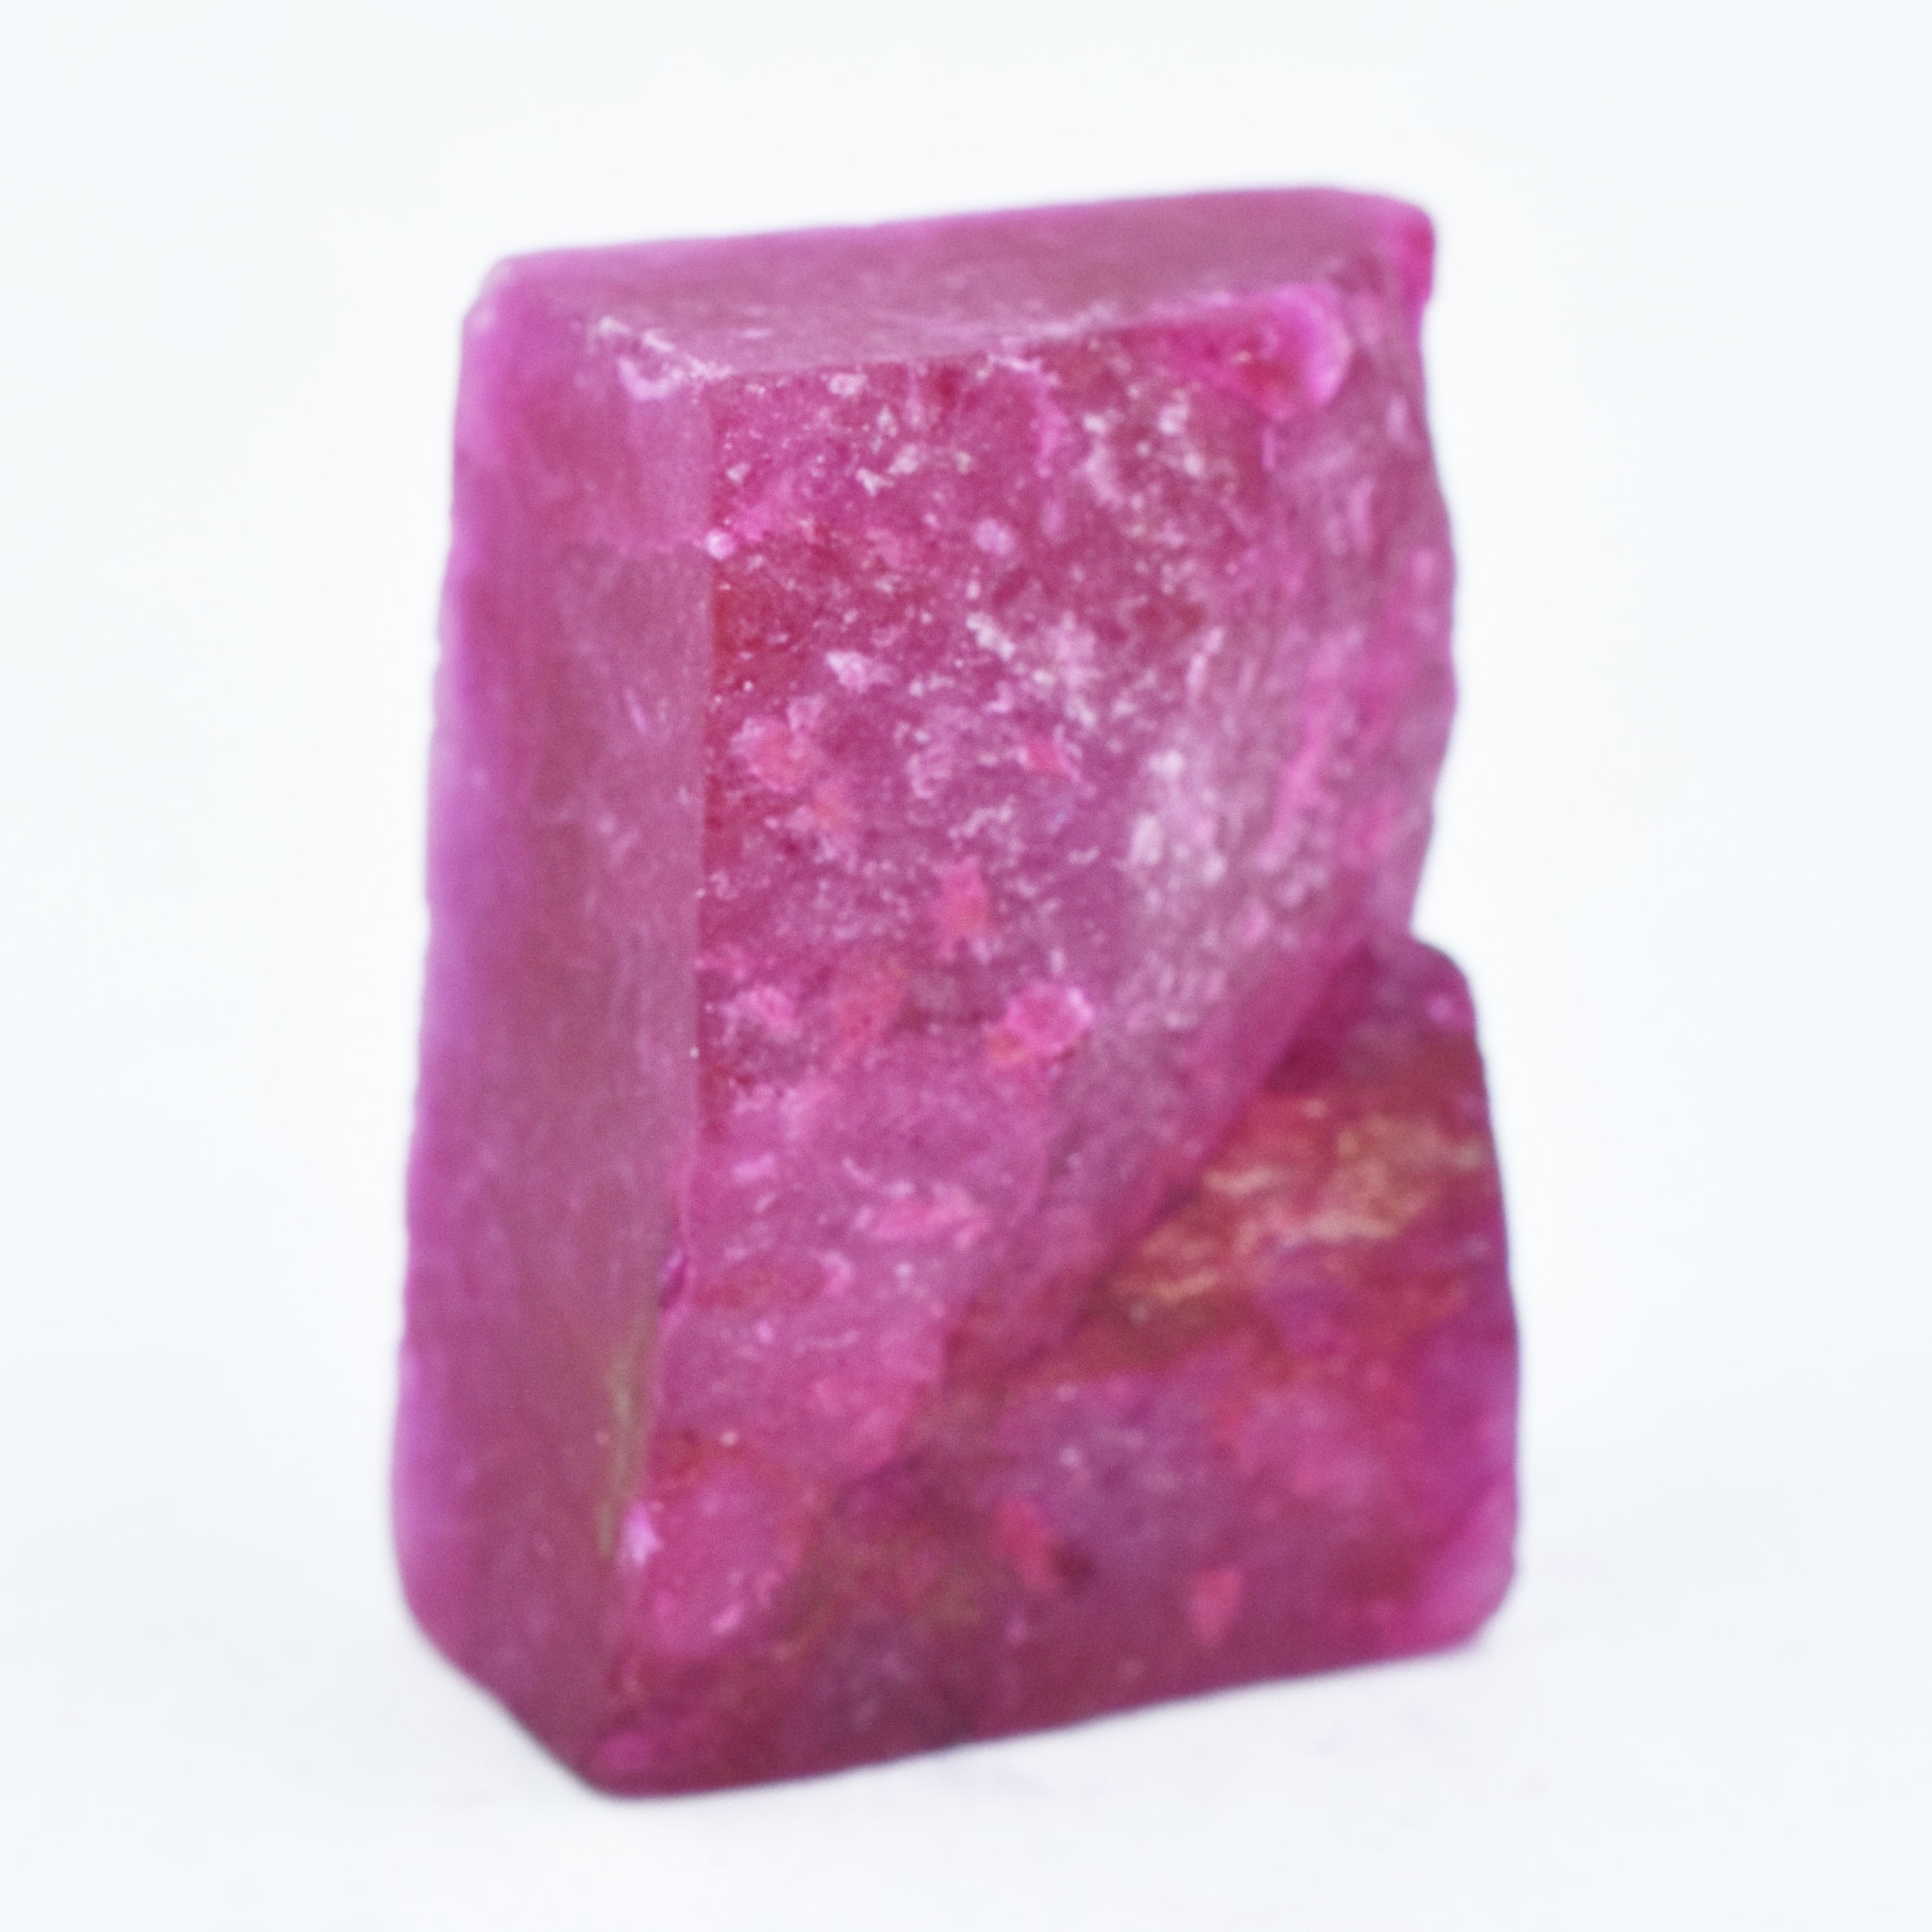 Ruby Free Shipping 256.87 Carat Natural Certified Meditation African Pigeon Blood Red Rough Rocks and Minerals 36x21x18 mm With Excellent quality